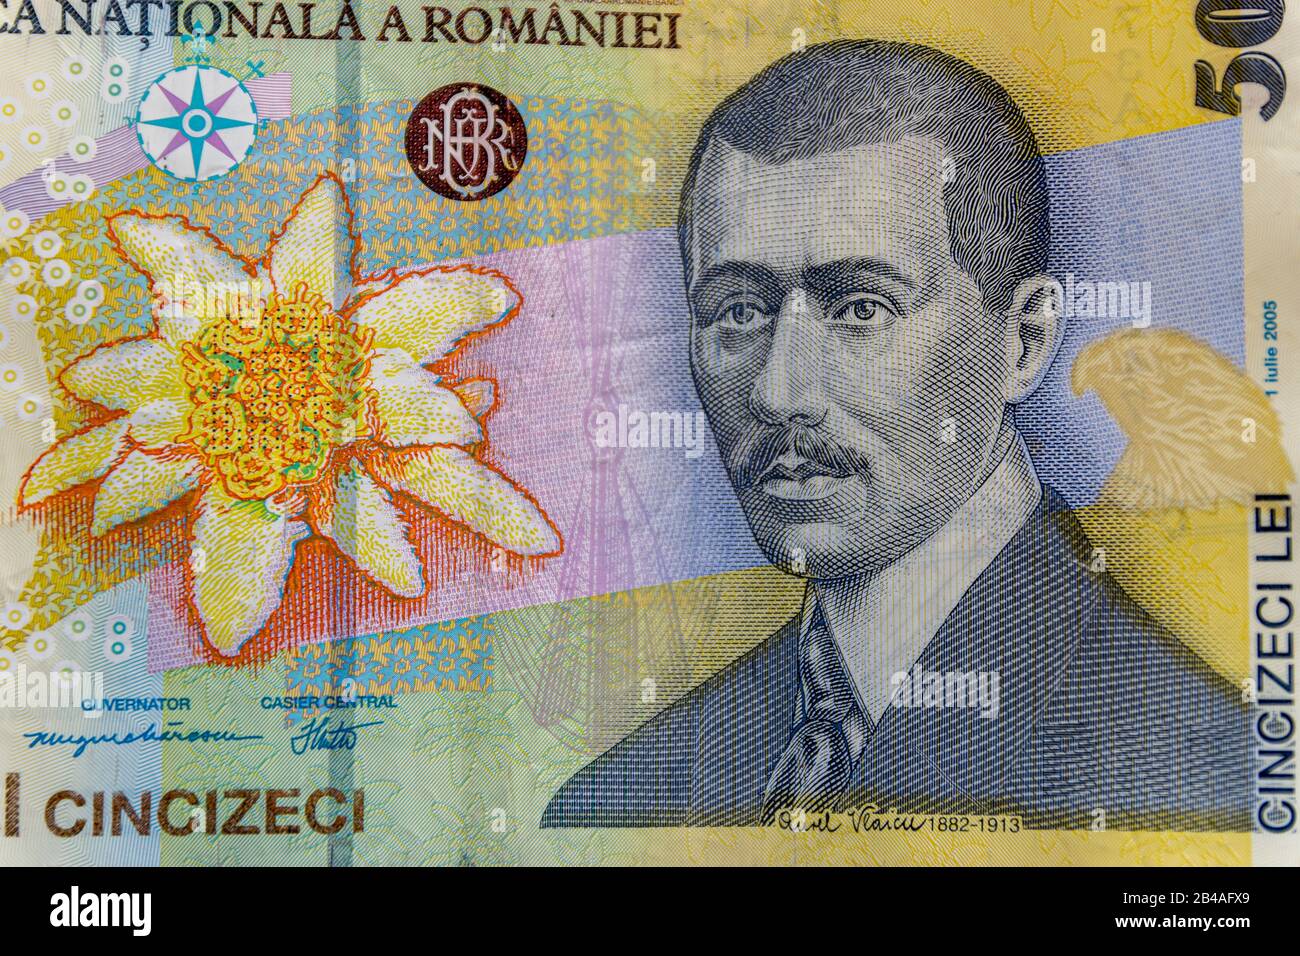 Aurel Vlaicu portrait on the 50 RON banknote. Coloseup of RON, Romanian Currency. Romanian RON, Lei Banknotes issued by BNR, National Bank of Romania. Stock Photo